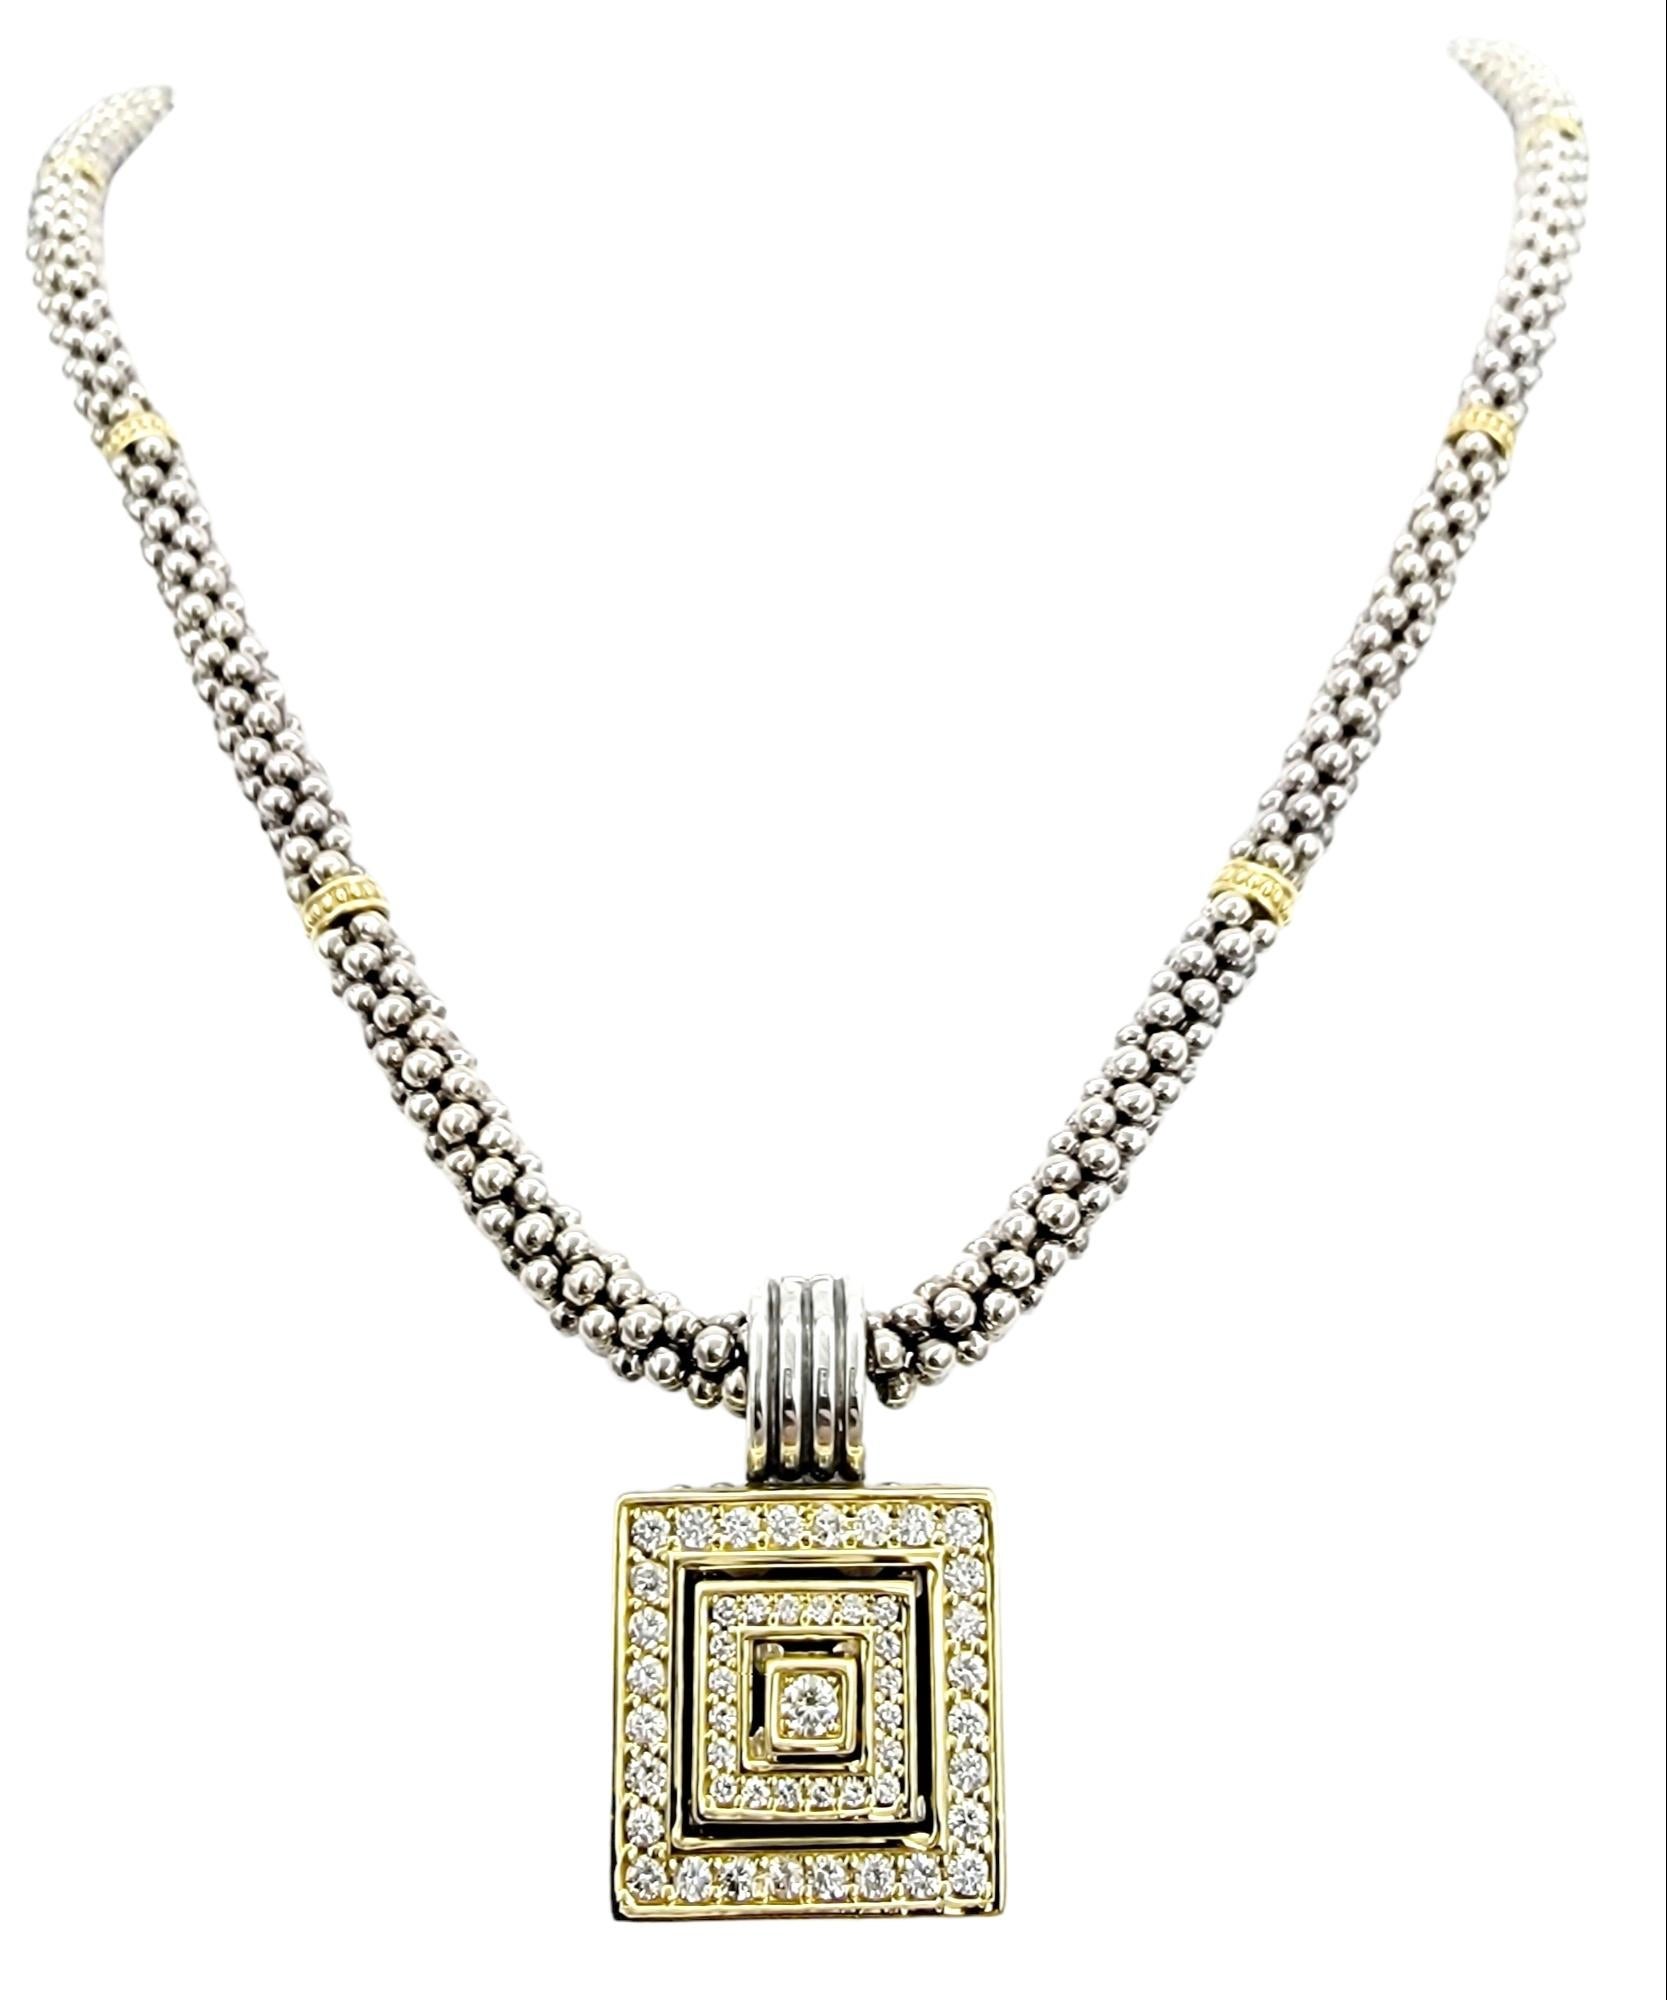 Lagos Caviar Sterling Silver and 18K Yellow Gold Diamond Square Pendant Necklace In Good Condition For Sale In Scottsdale, AZ